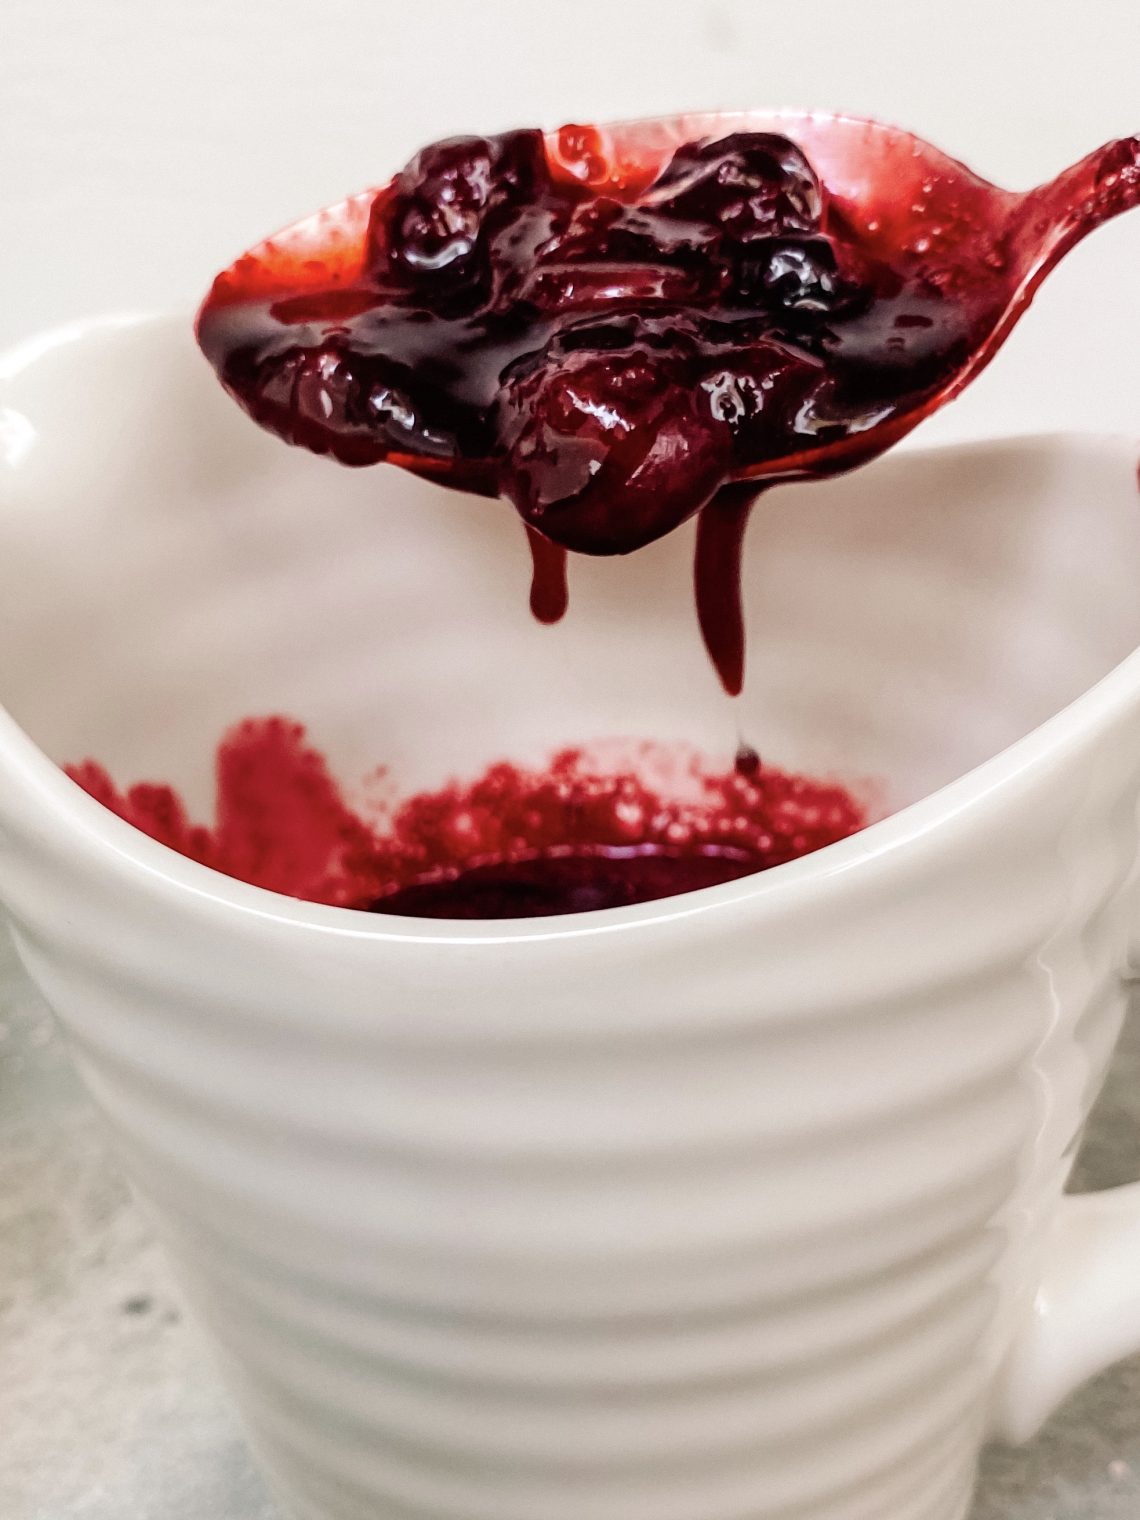 Photograph of Blueberry Sauce